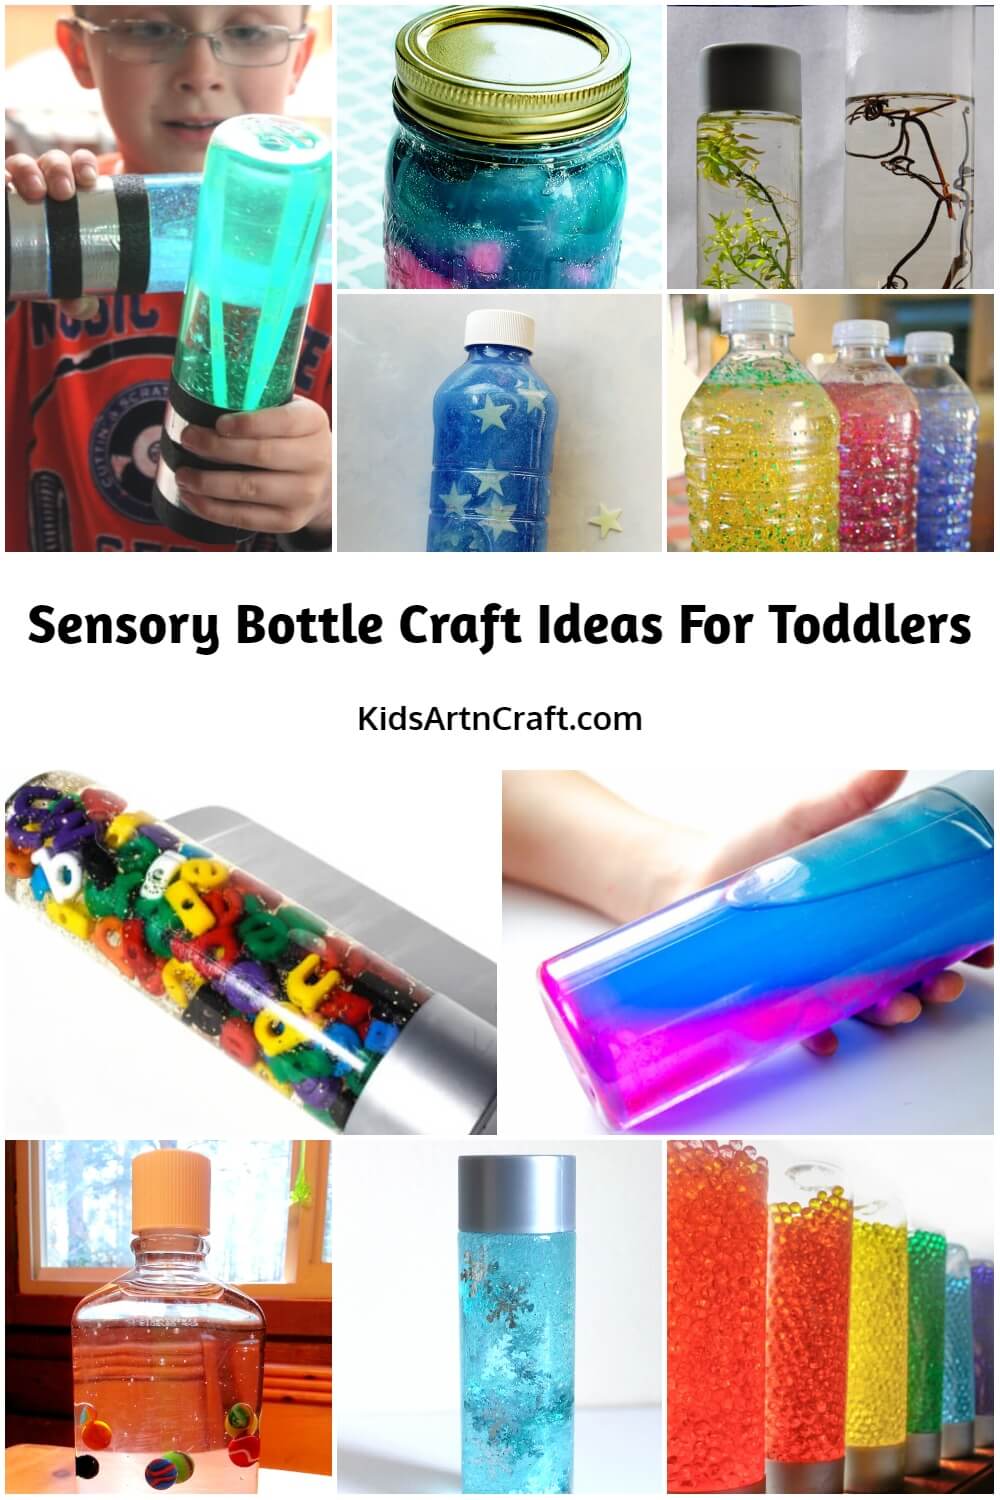 Sensory Bottle Craft Ideas For Toddlers